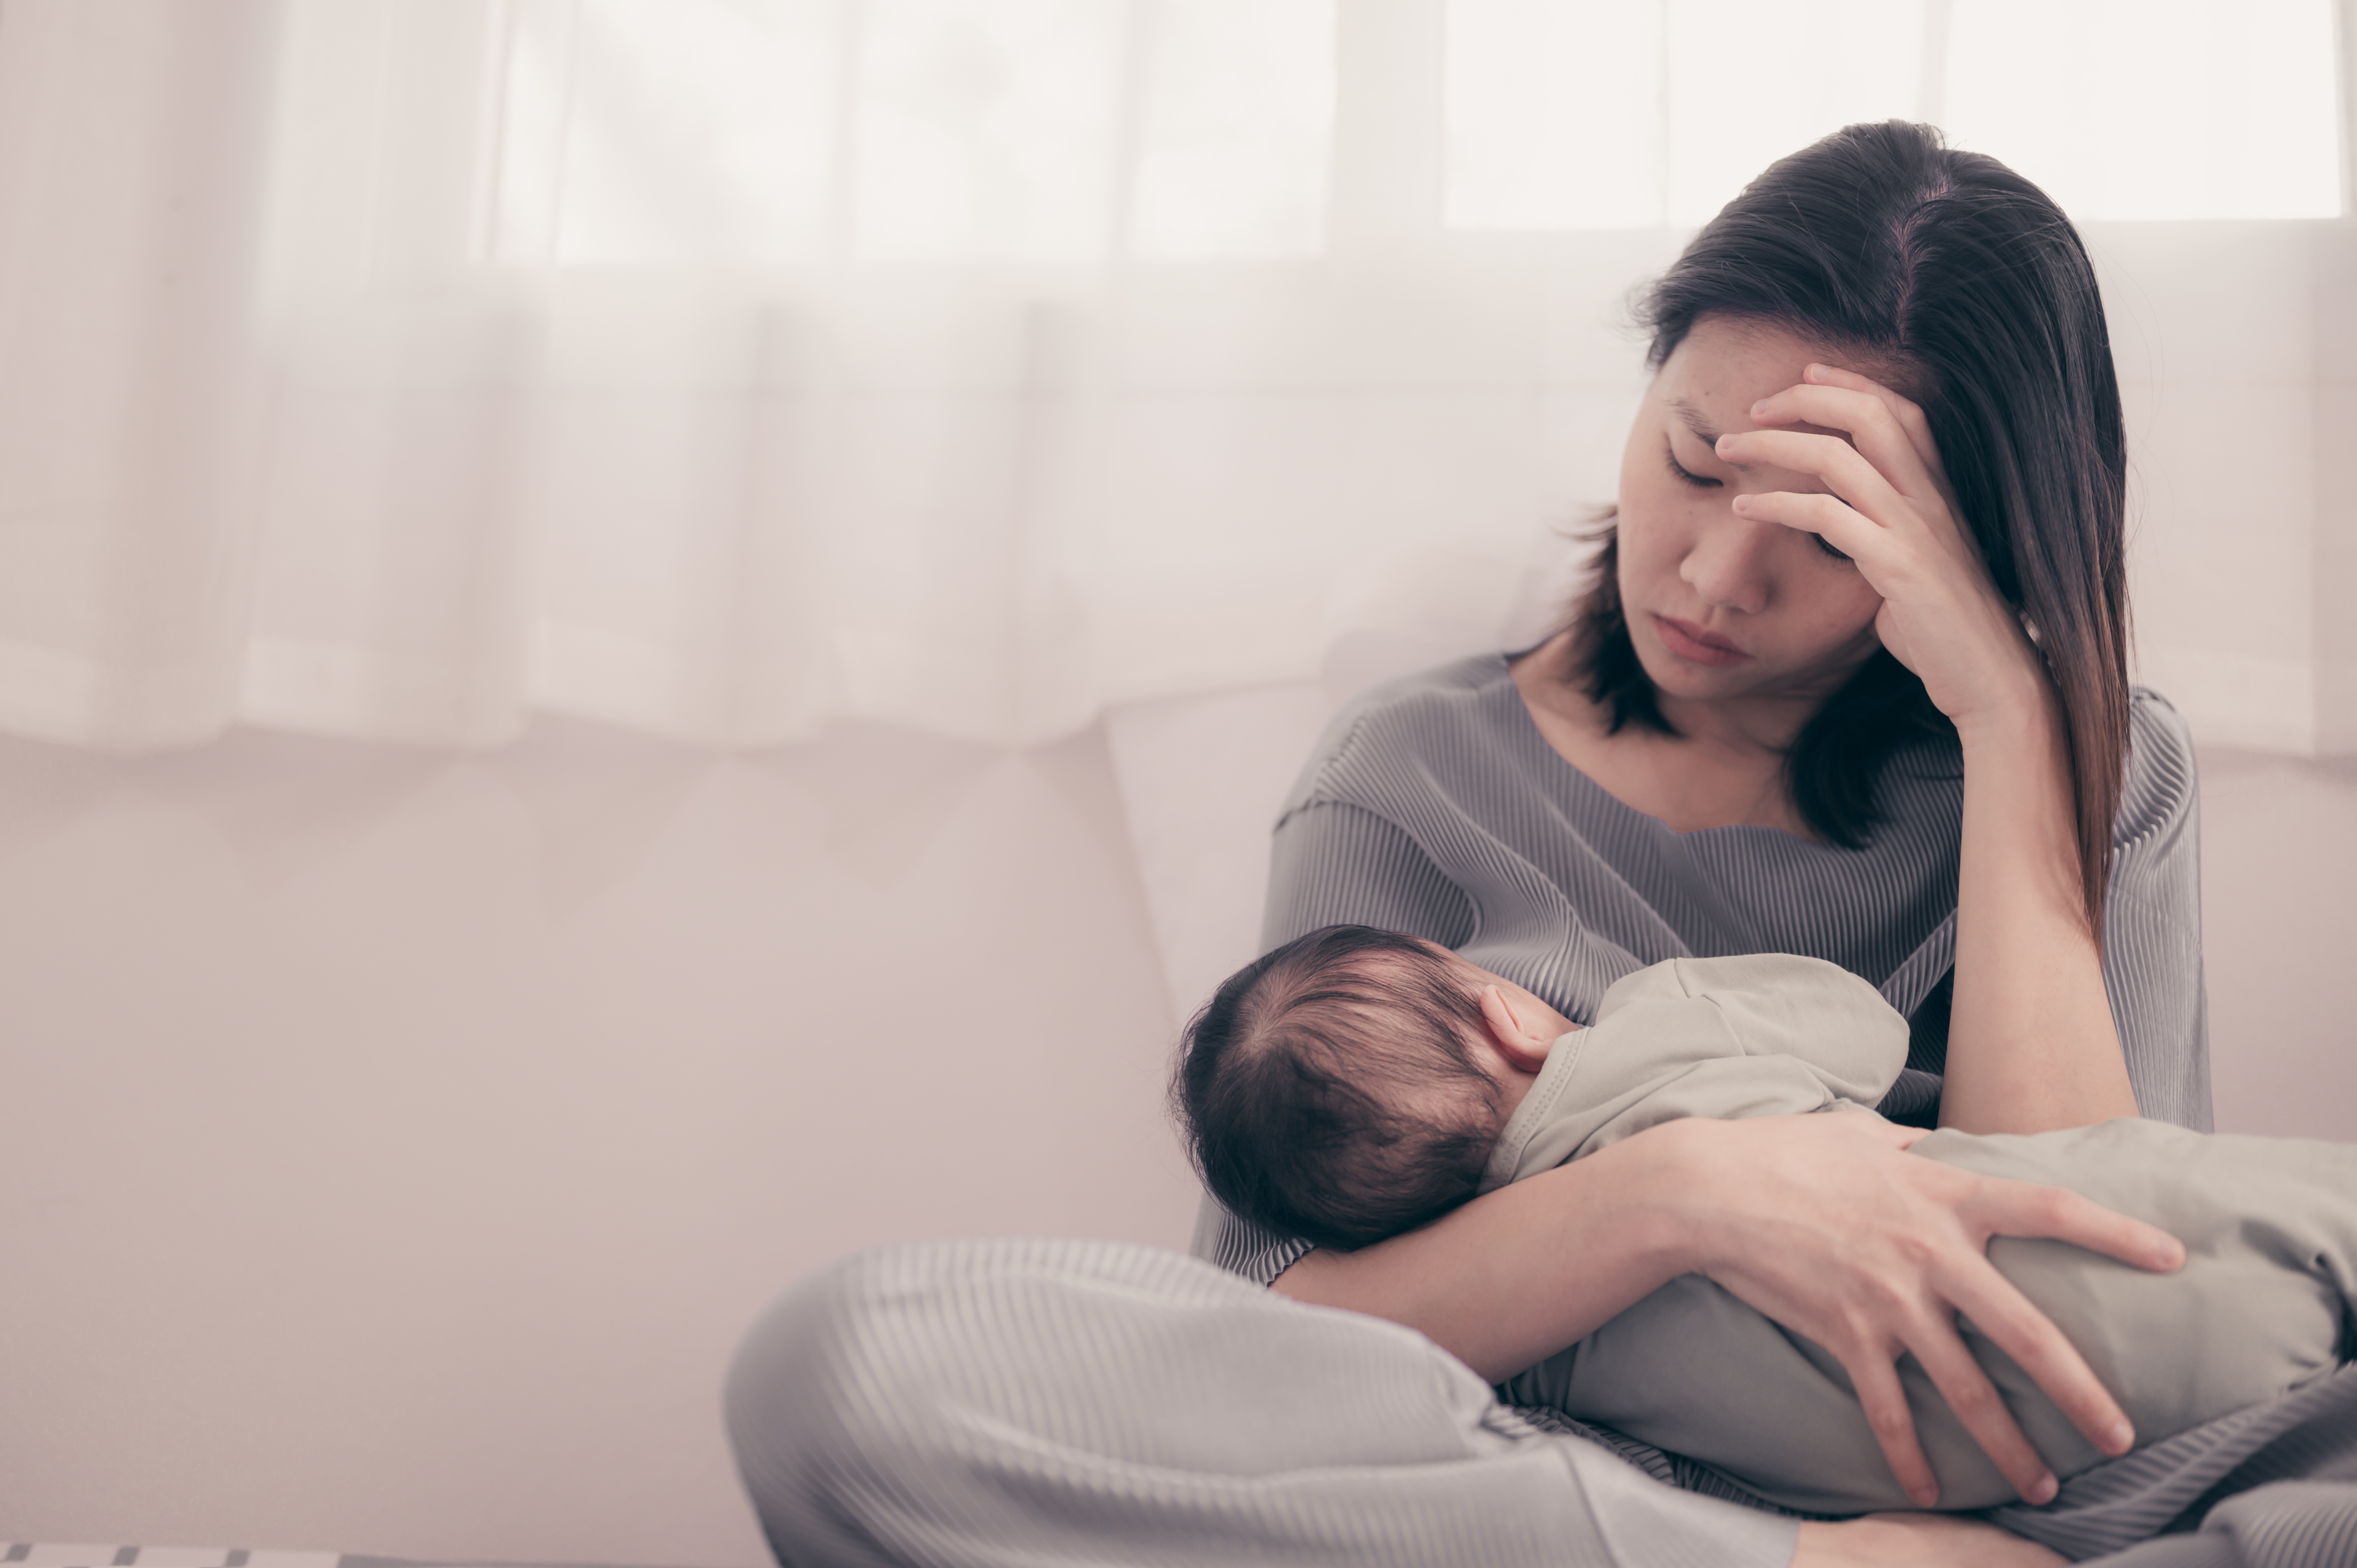 Woman looking sad while holding a baby